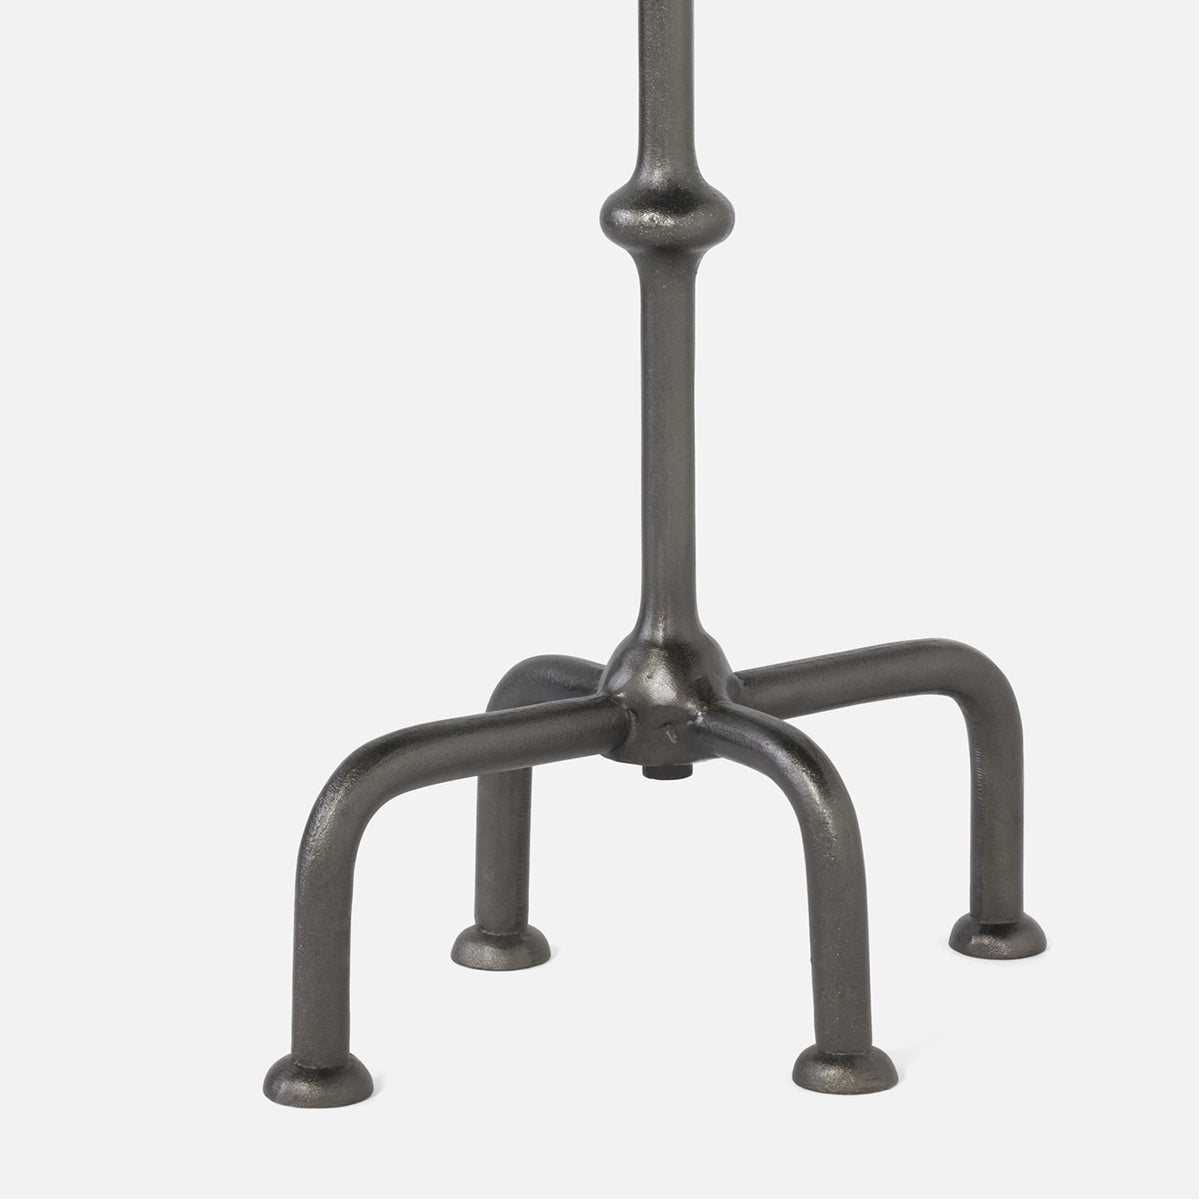 Made Goods Louise Accent Table in Black Nickel Aluminum